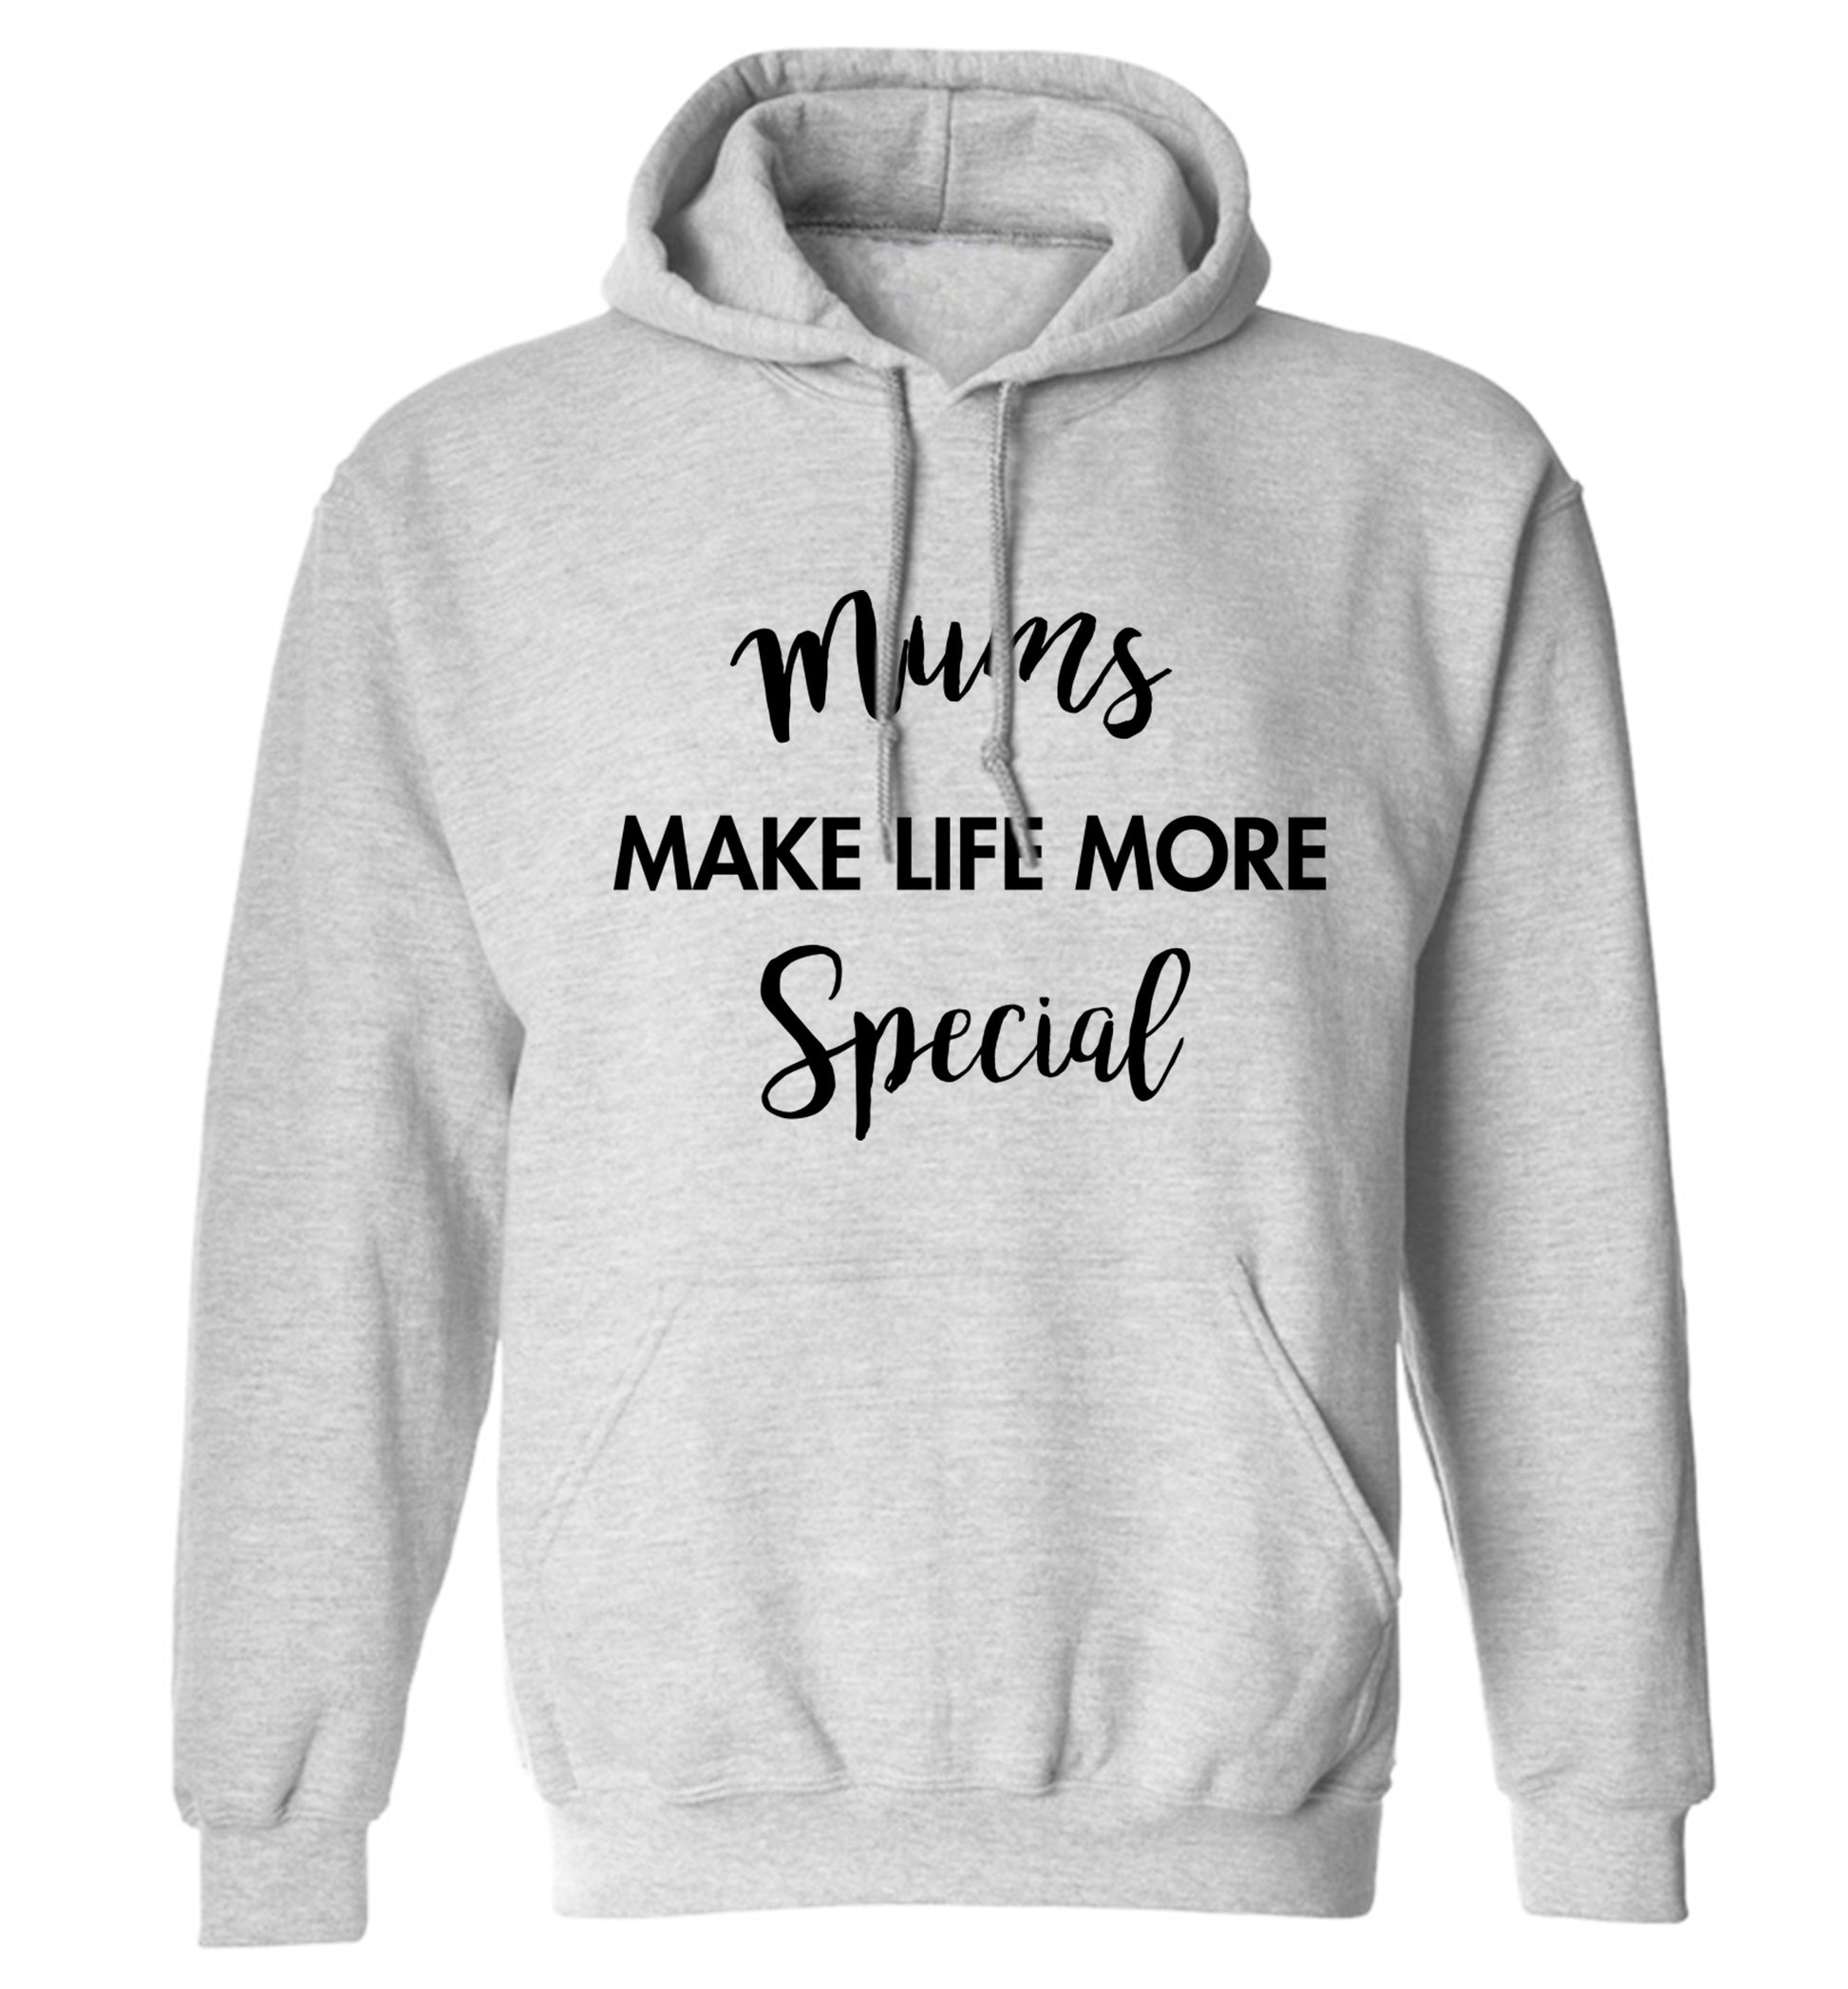 Mum's make life more special adults unisex grey hoodie 2XL